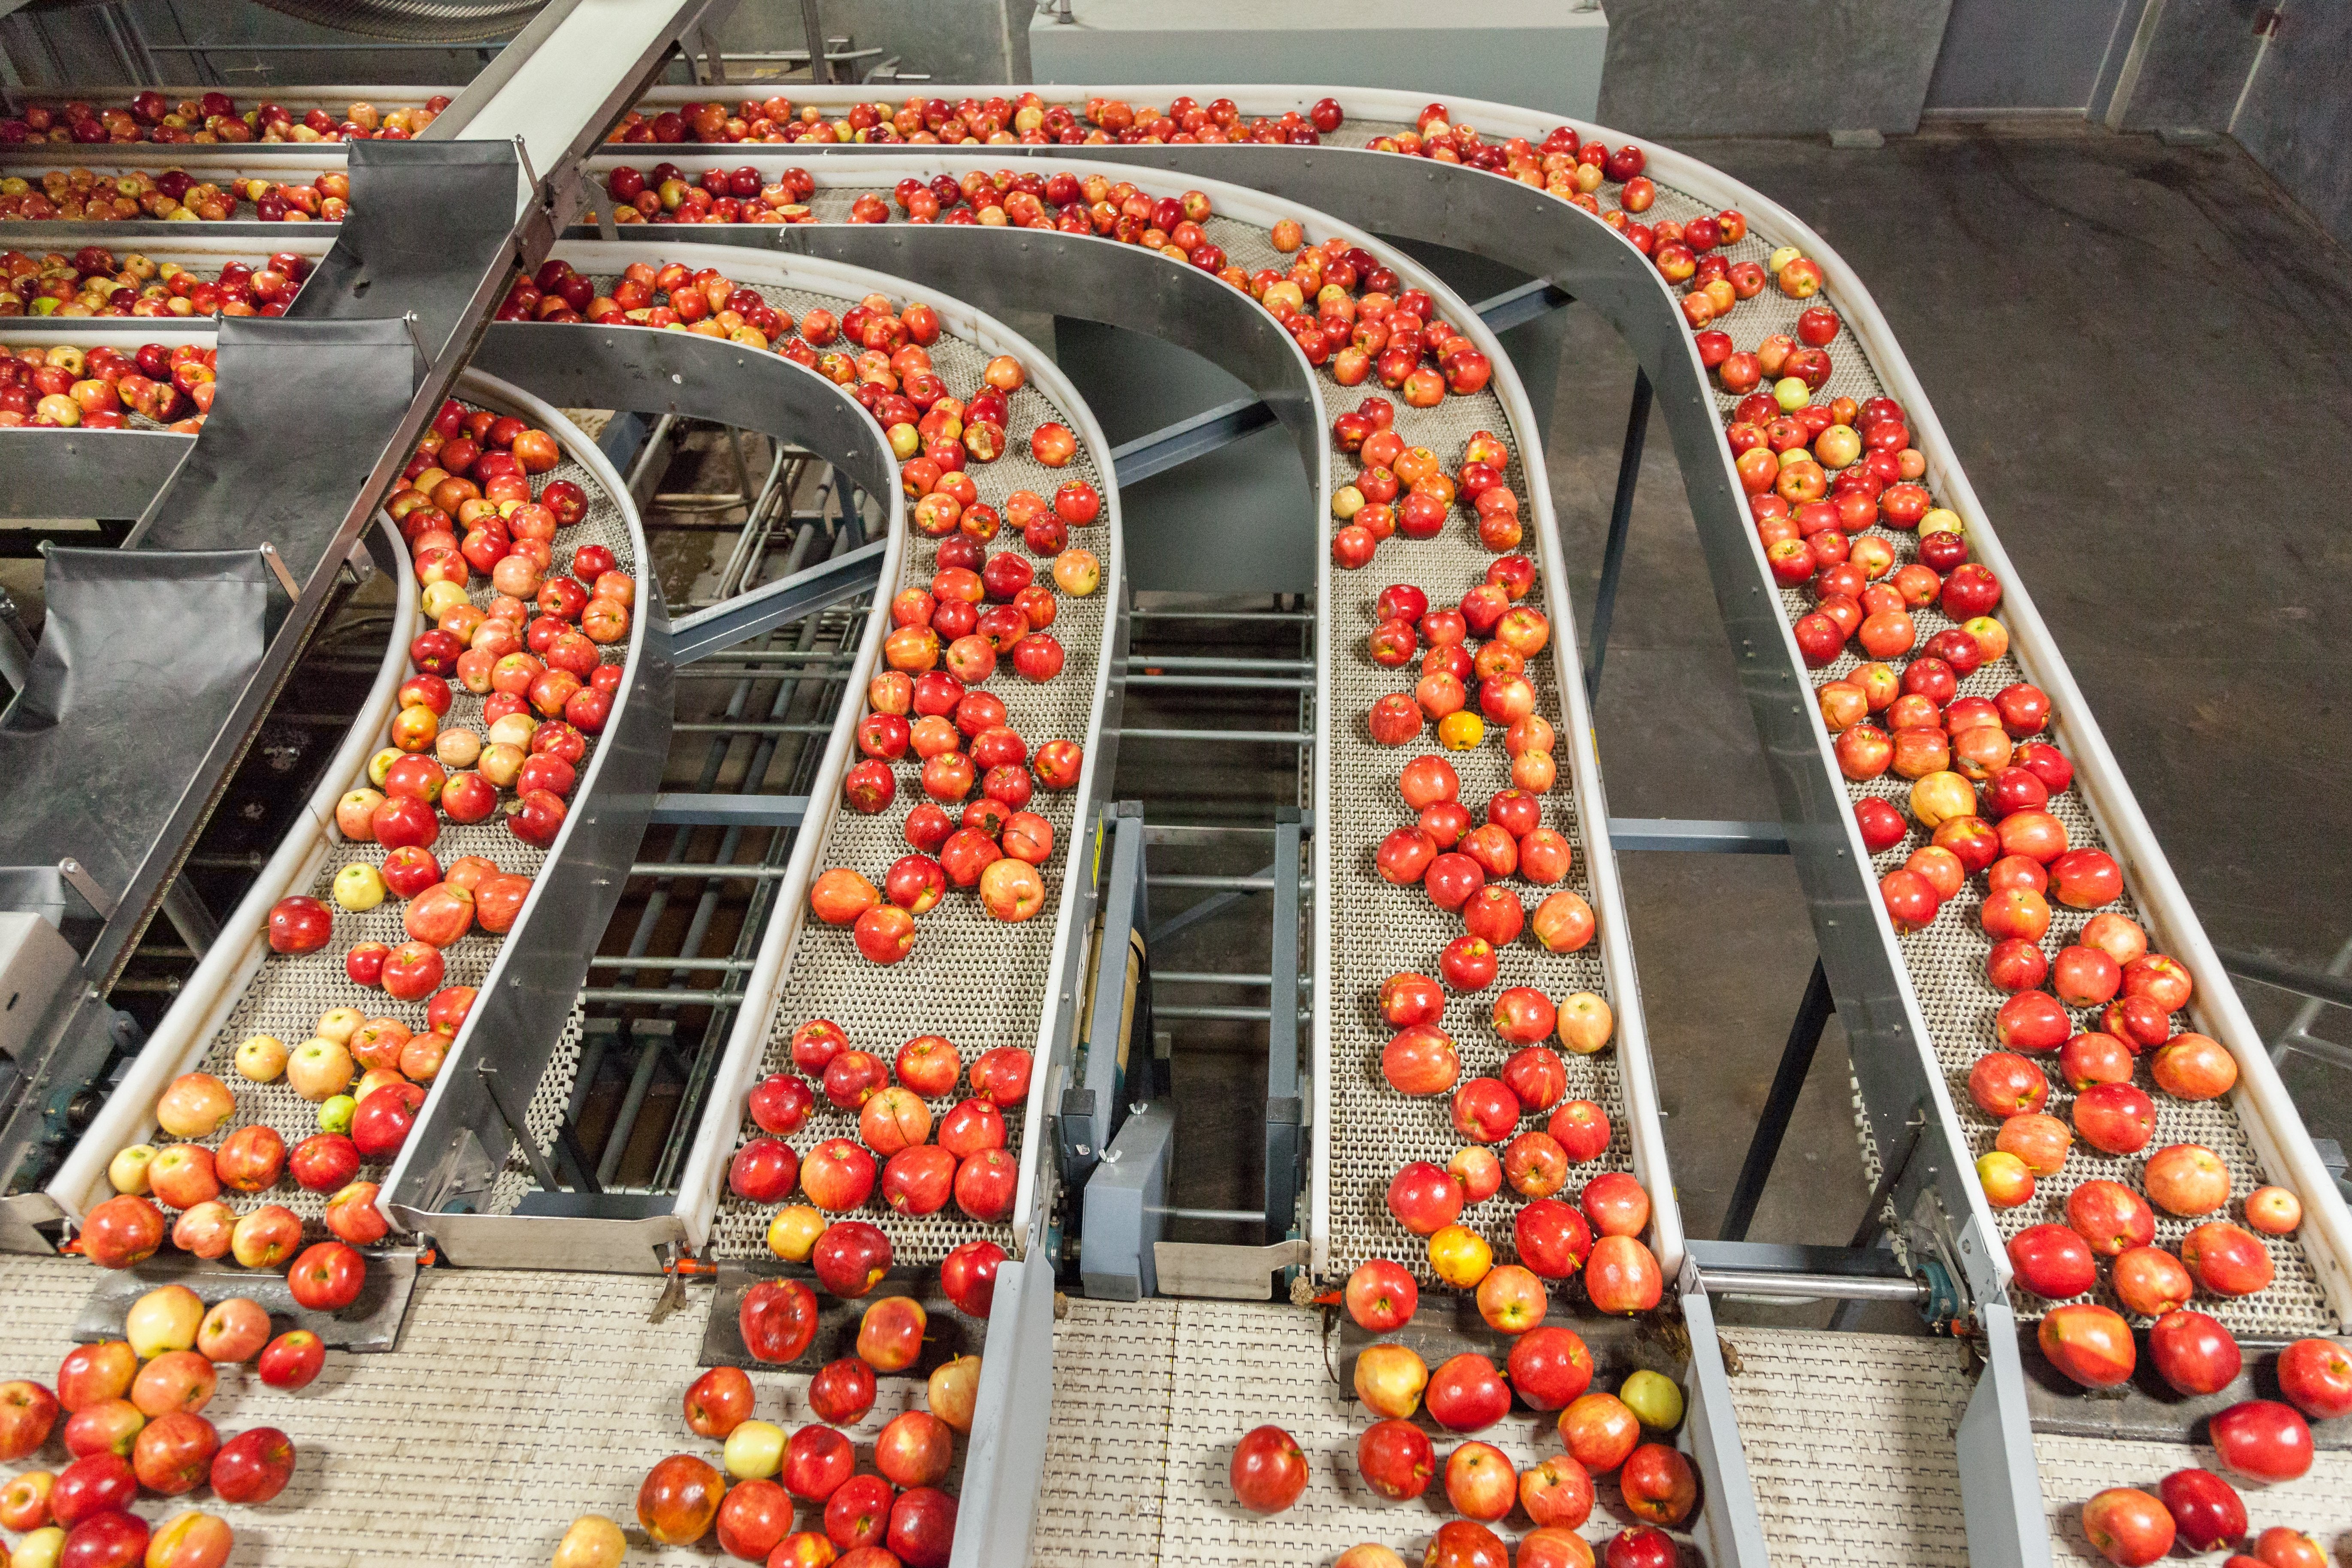 Red and yellow apples moving through a packing facility, lined up in silver trays that are separating them. 